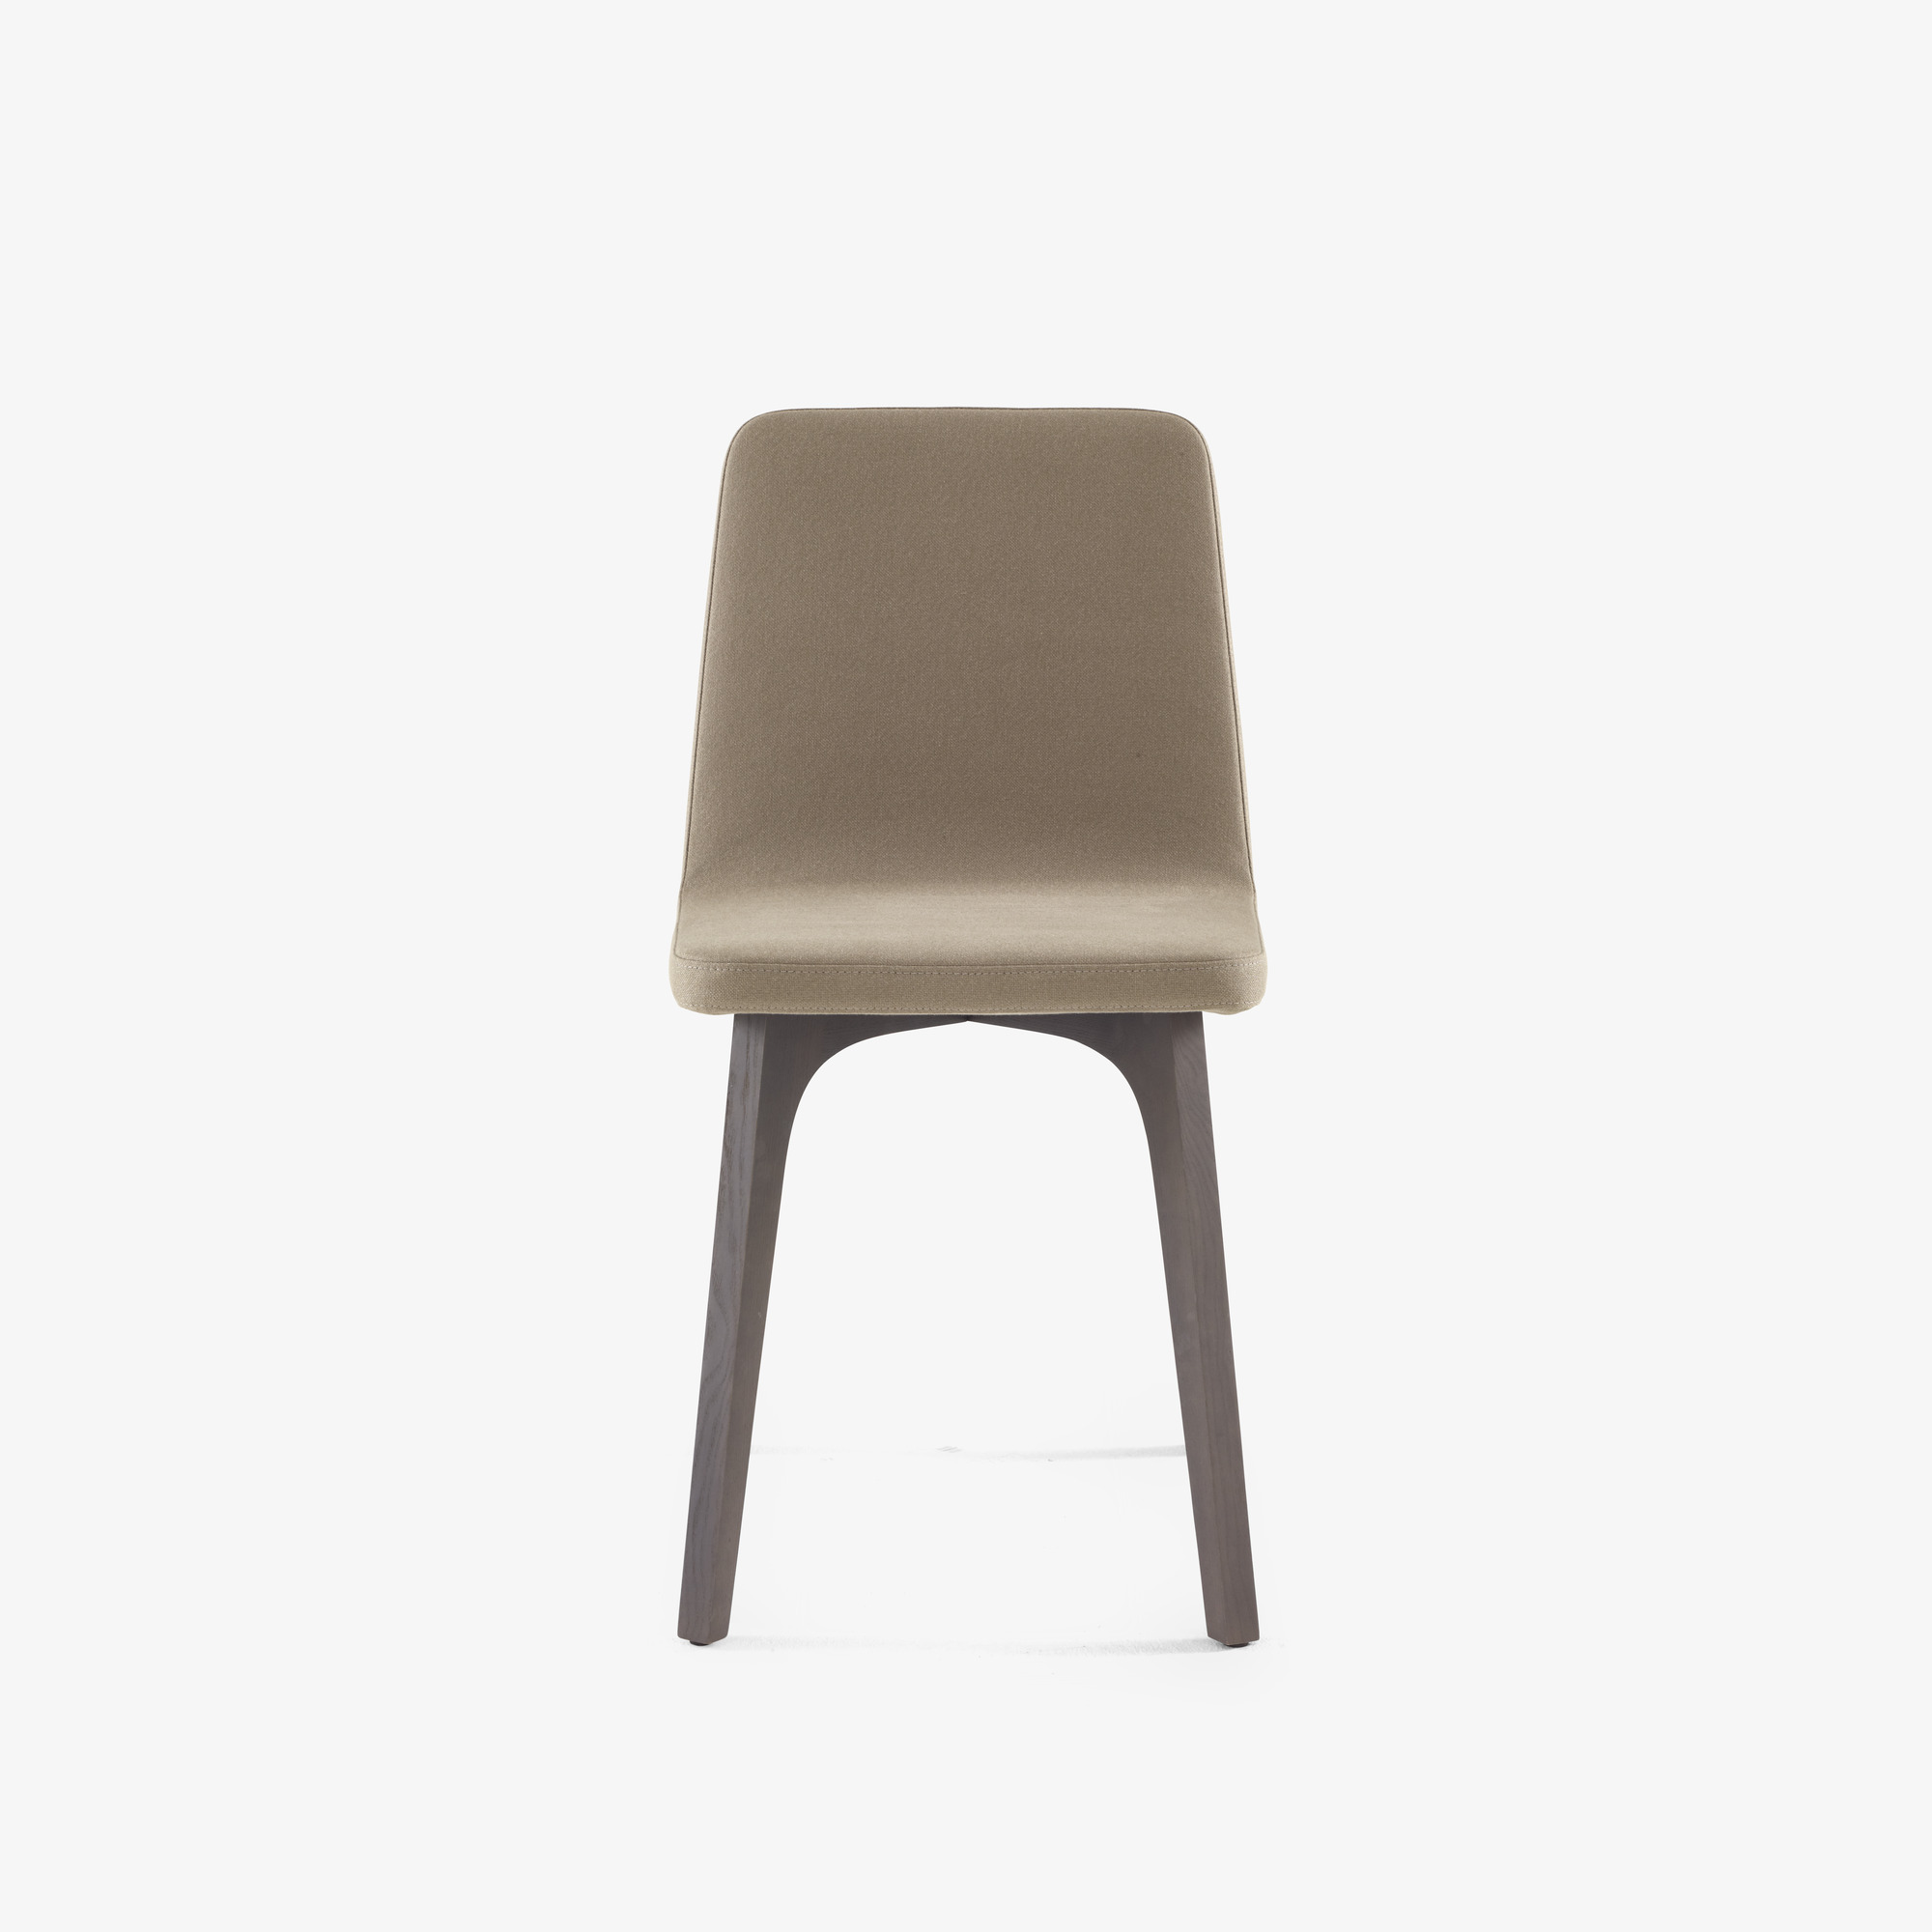 Image Dining chair wooden base 1